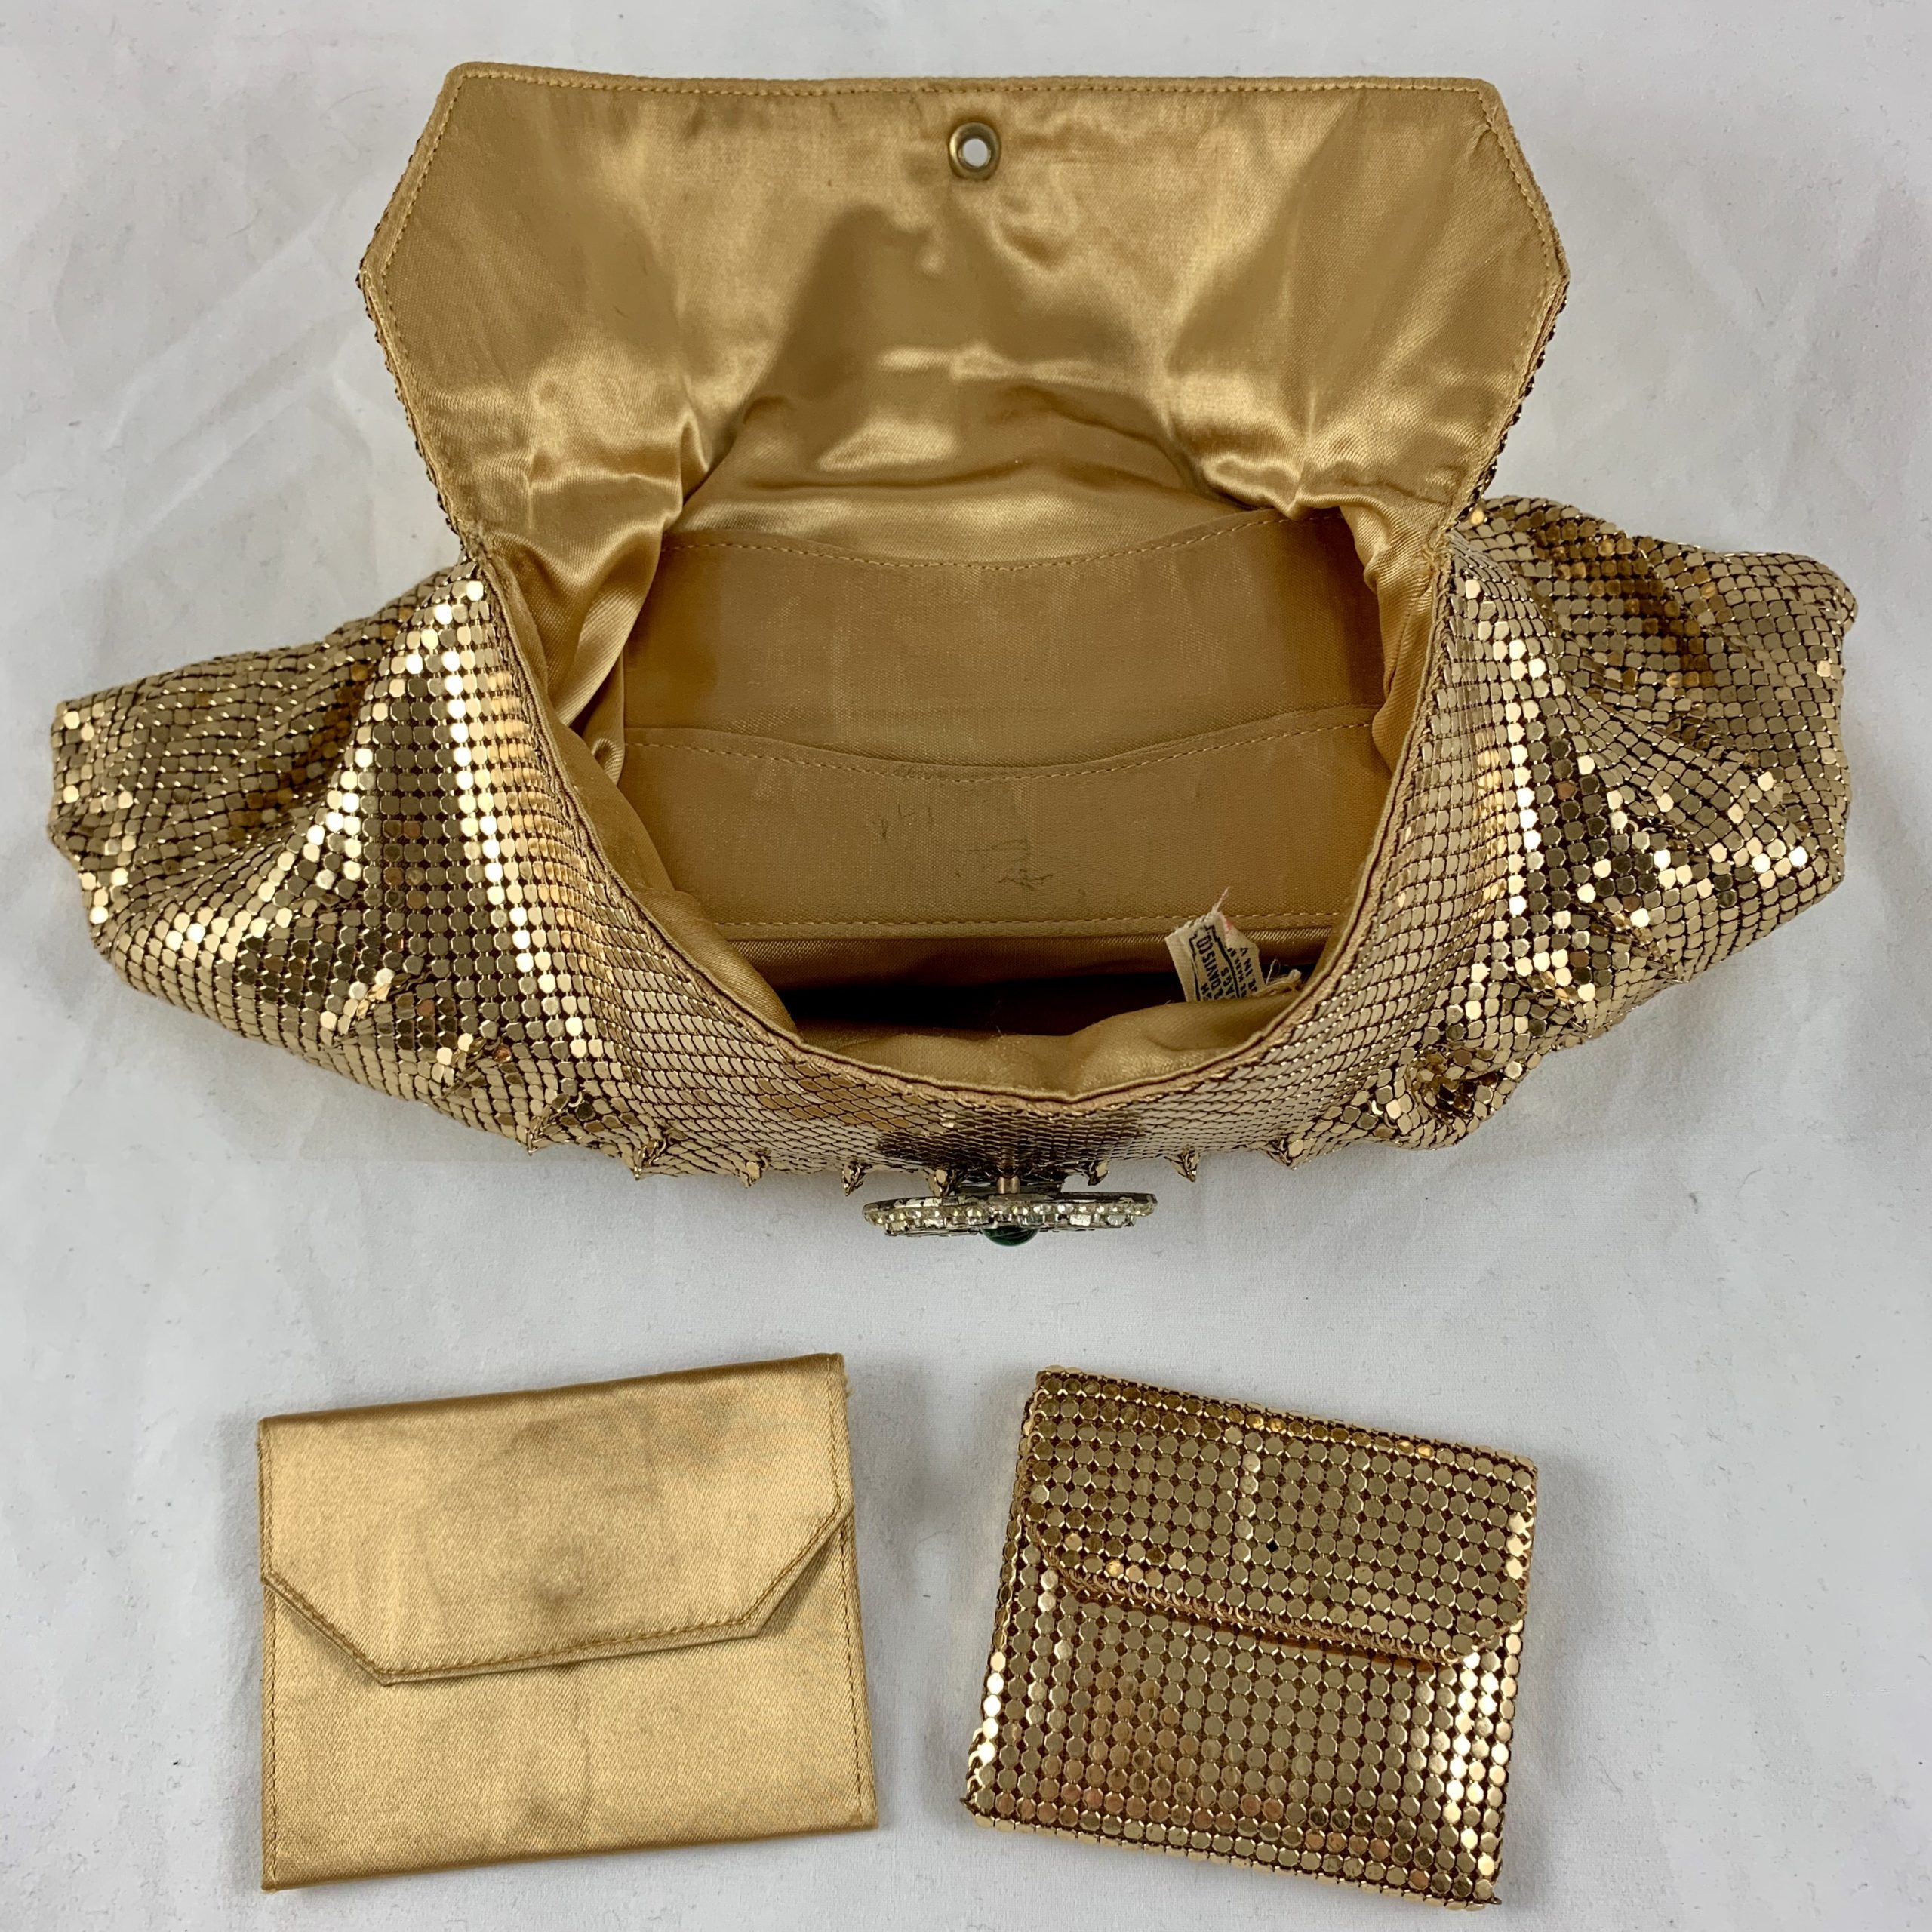 1950s Whiting and Davis Gold Mesh Jewel Closure Evening Clutch with Coin Purse